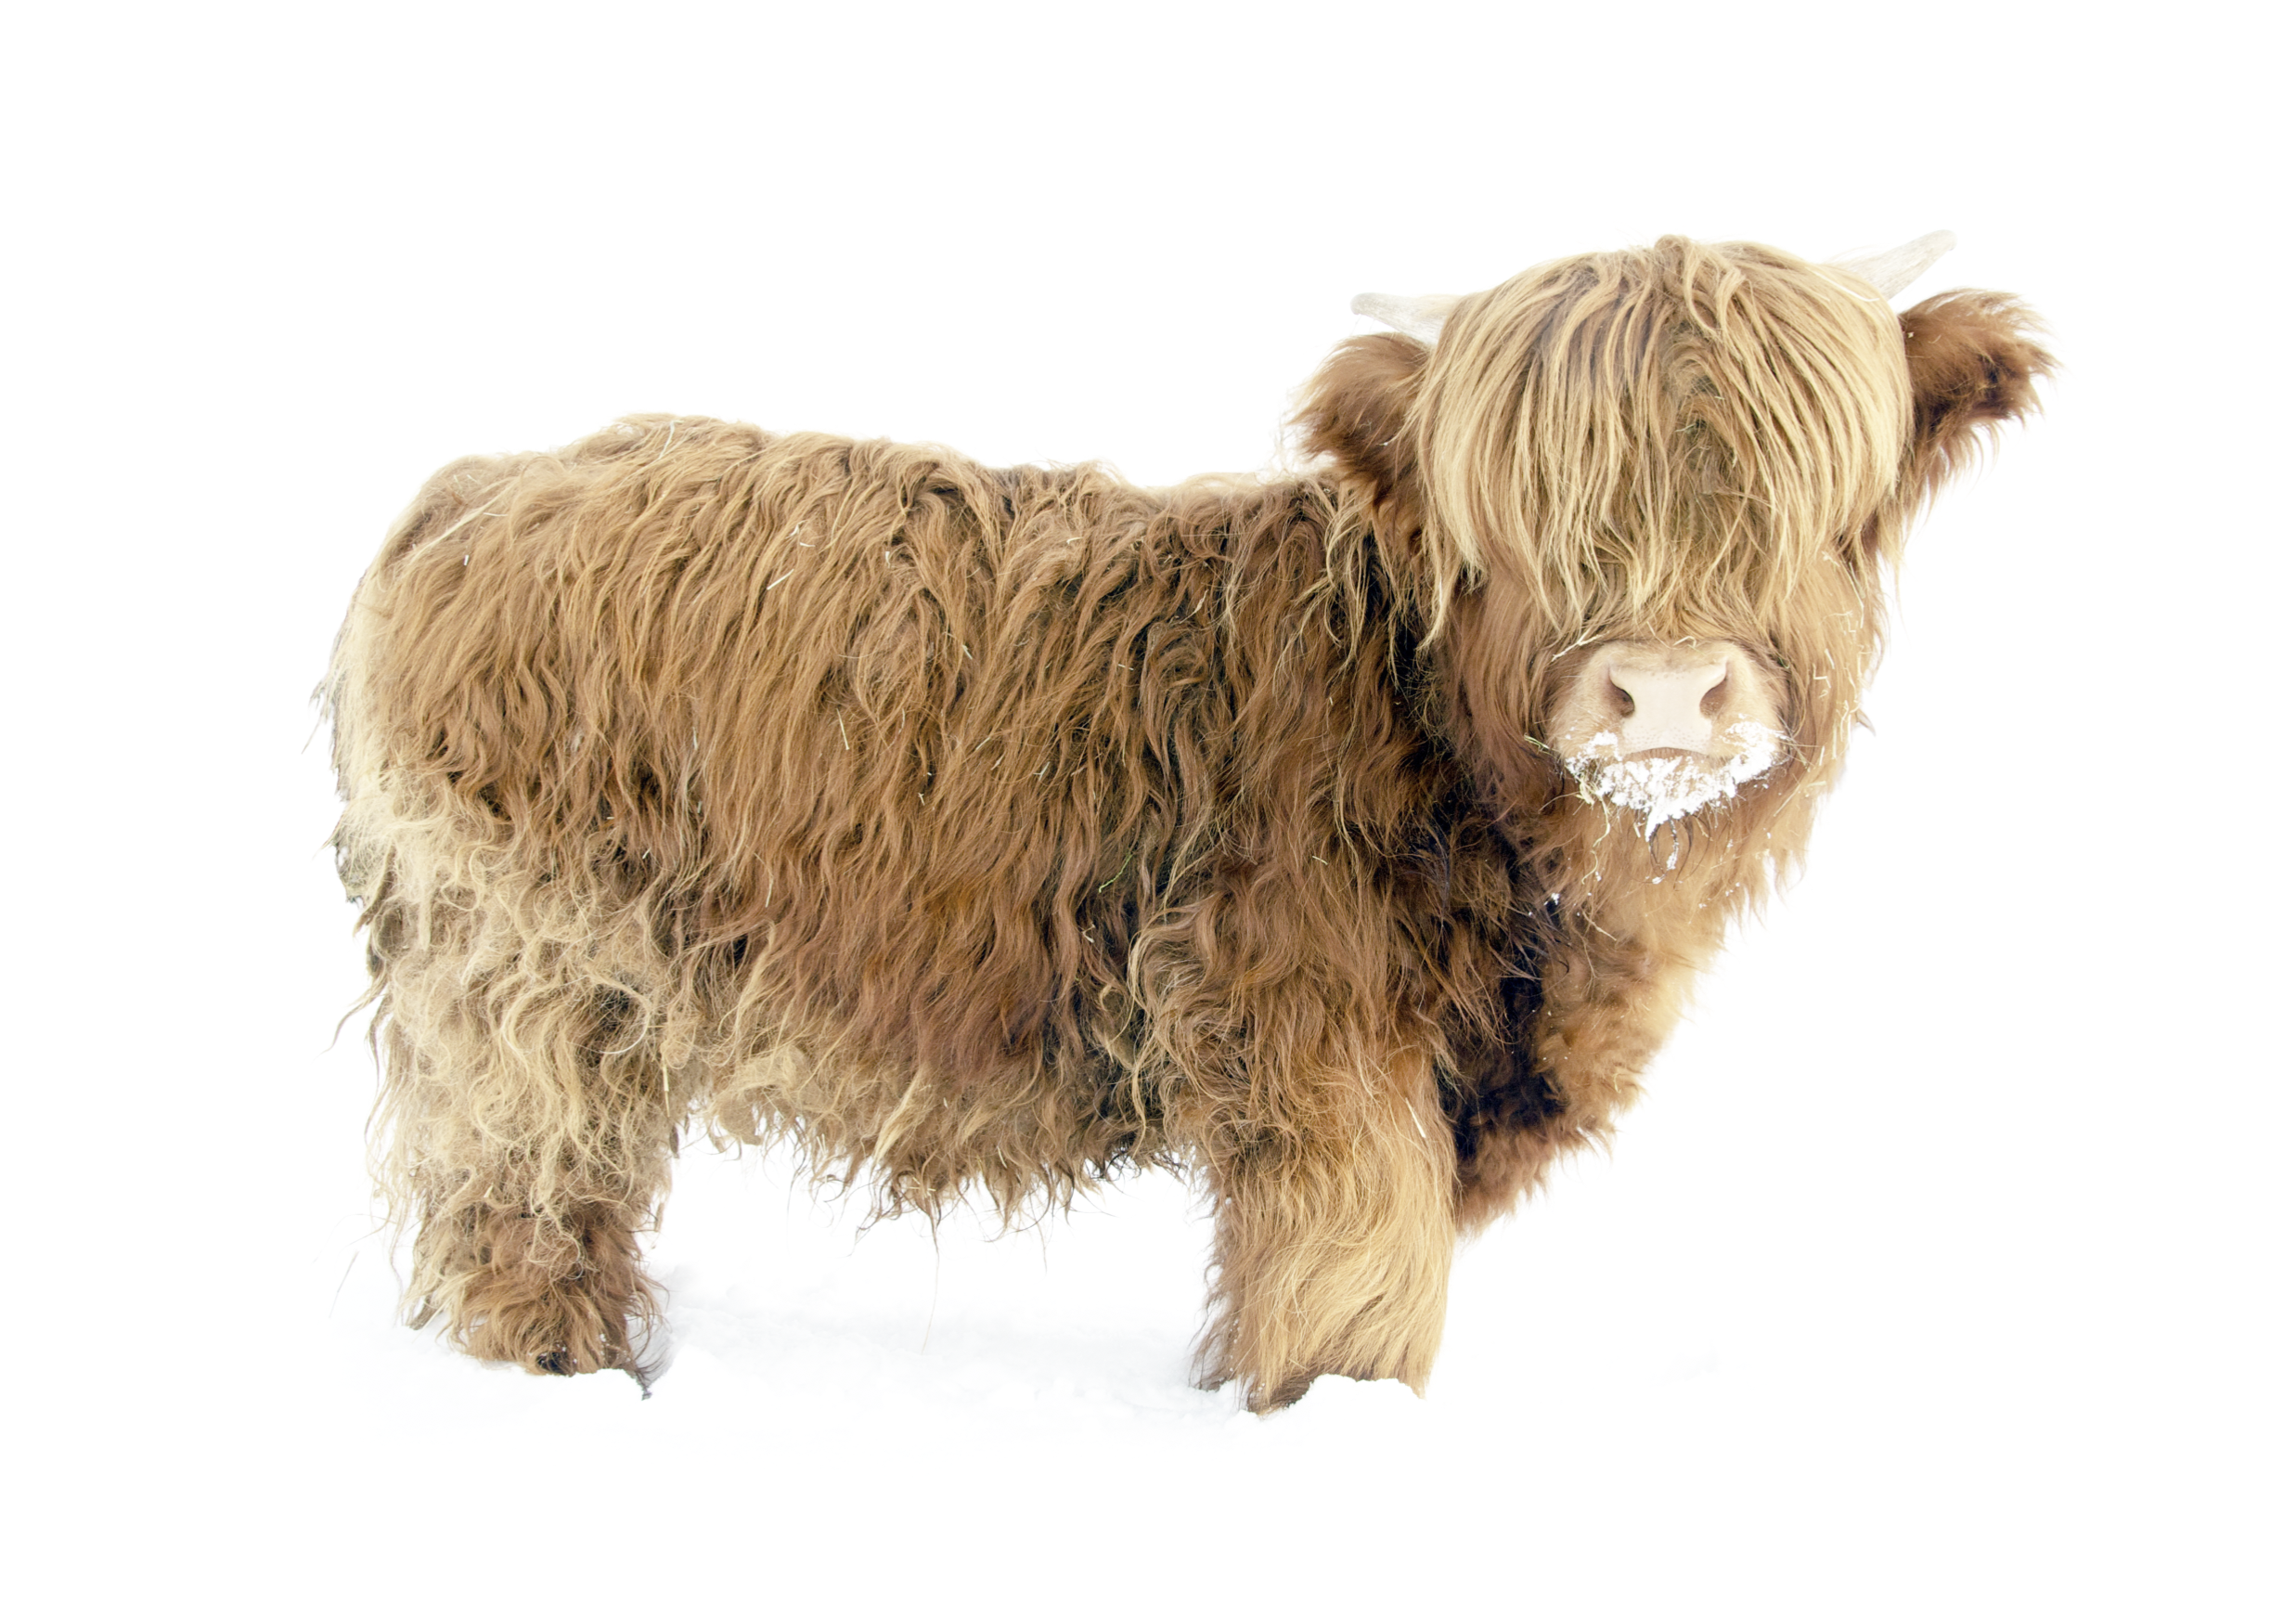 Tiffany the Highland Cow – Hustle Living